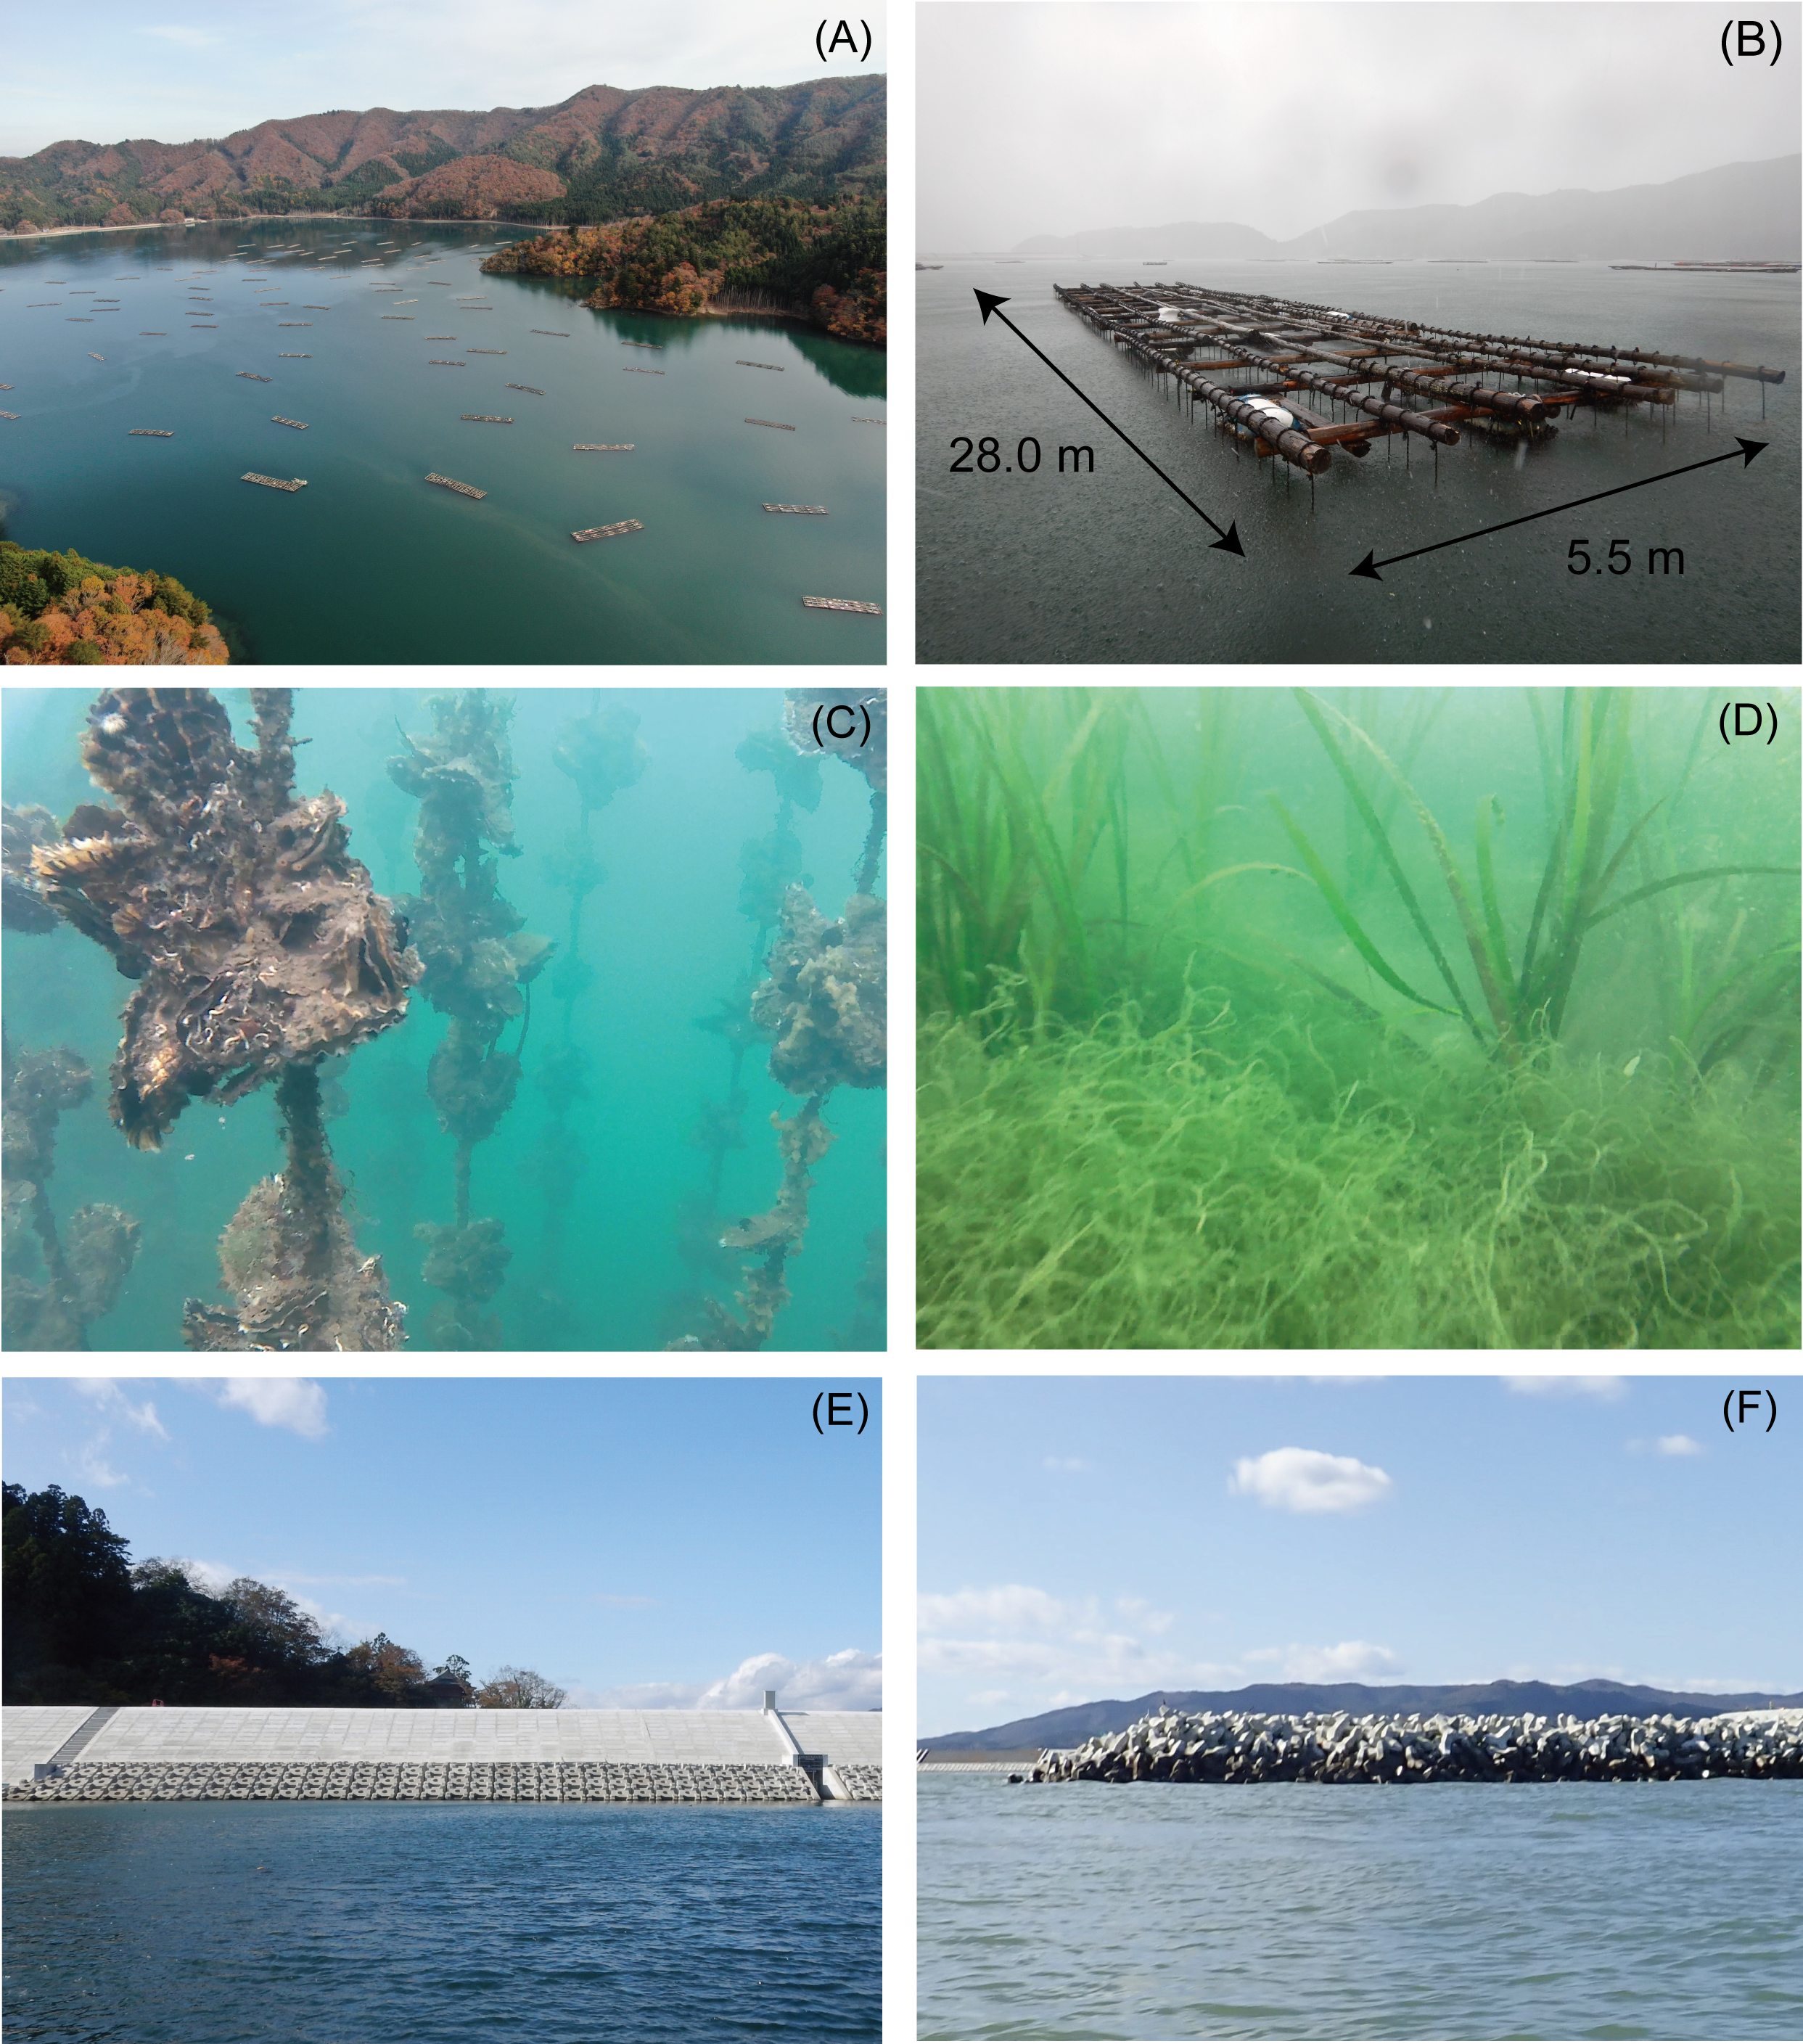 Protect seagrass meadows in China's waters